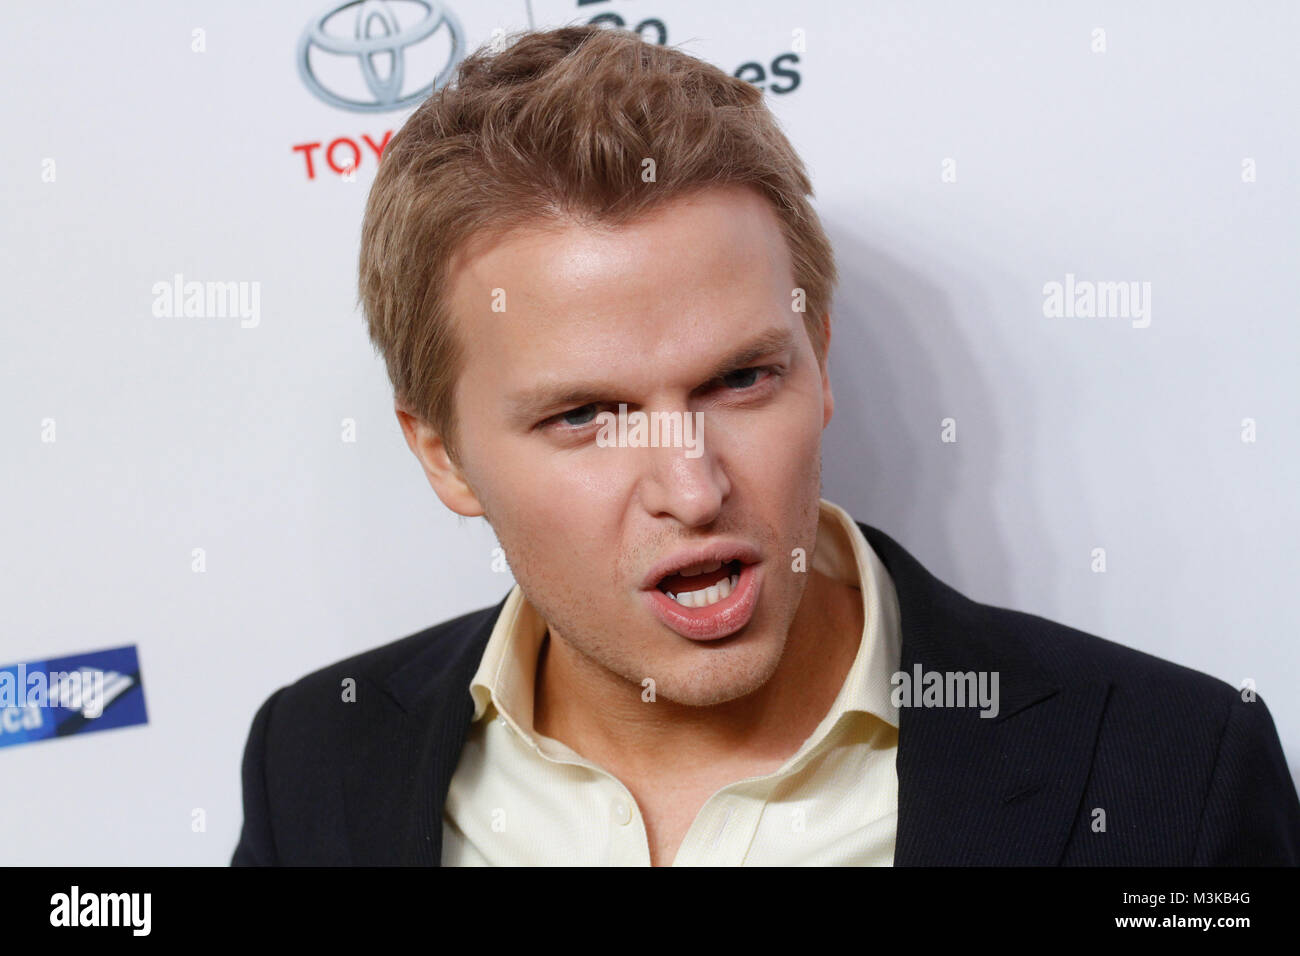 Journalist and activist Ronan Farrow attends the 5th Annual Women In The World Summit at Lincoln Center on April 3, 2014 in New York City. Stock Photo